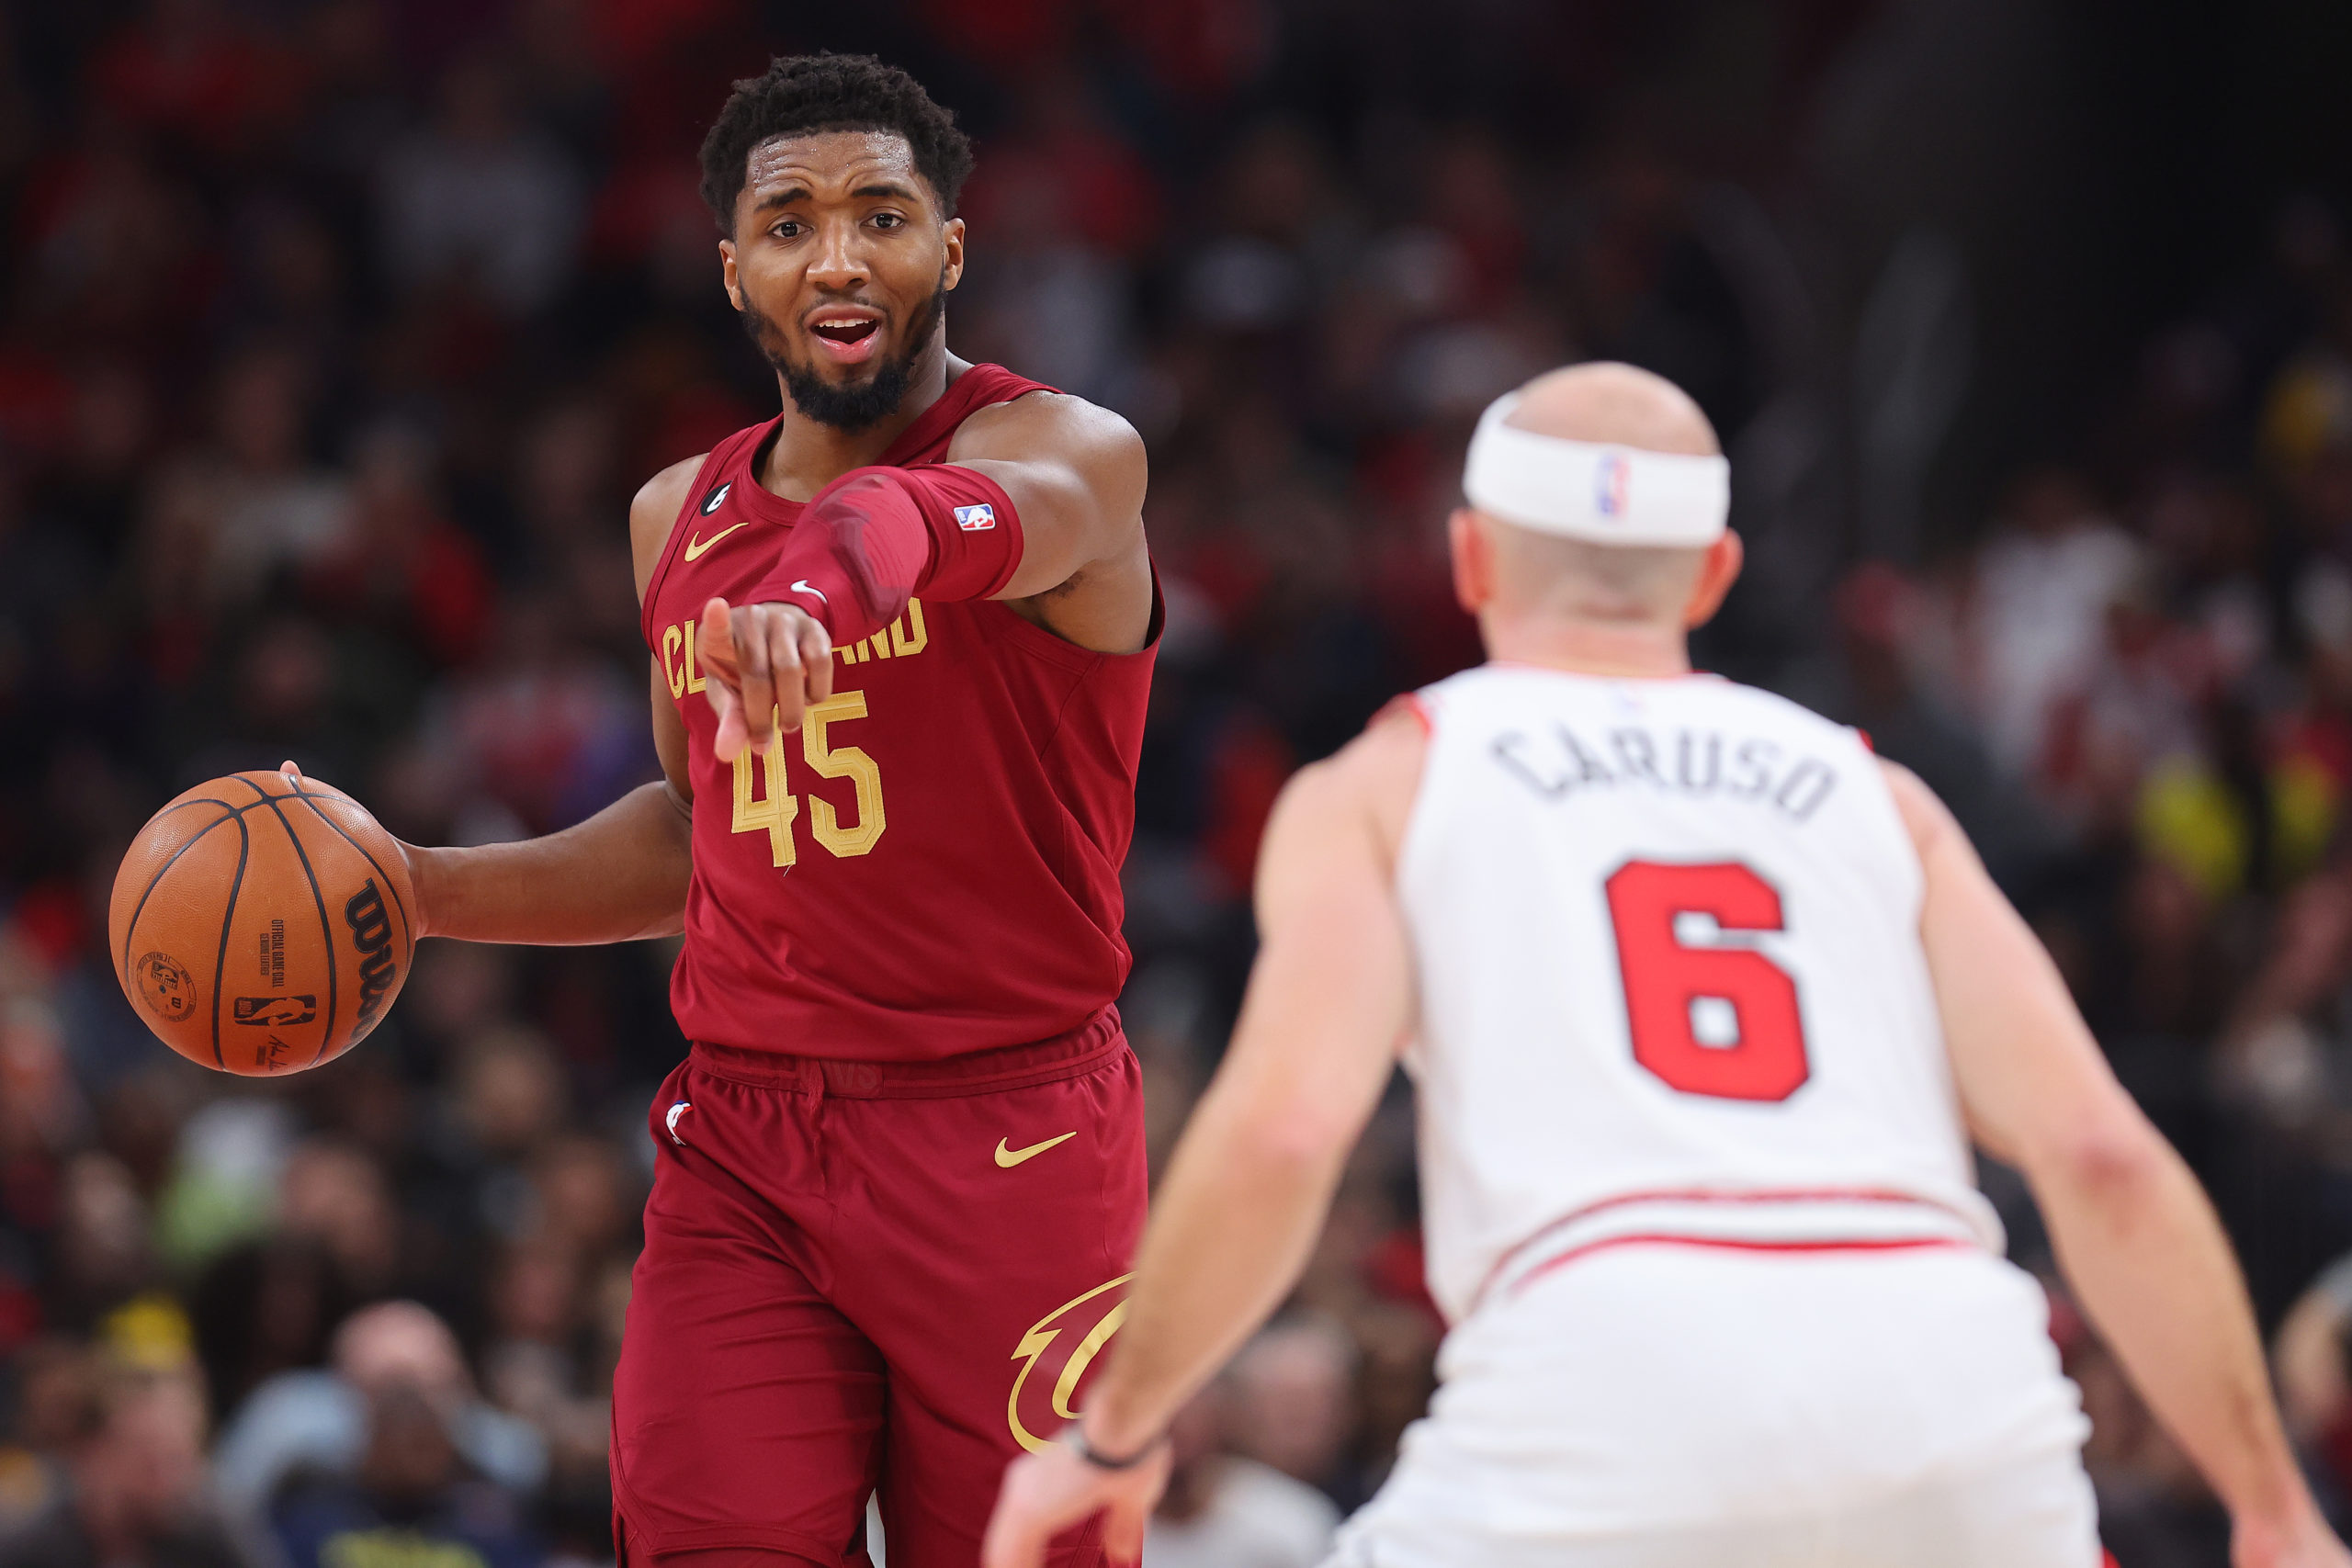 Morning links: The time Donovan Mitchell nearly hit a home run in